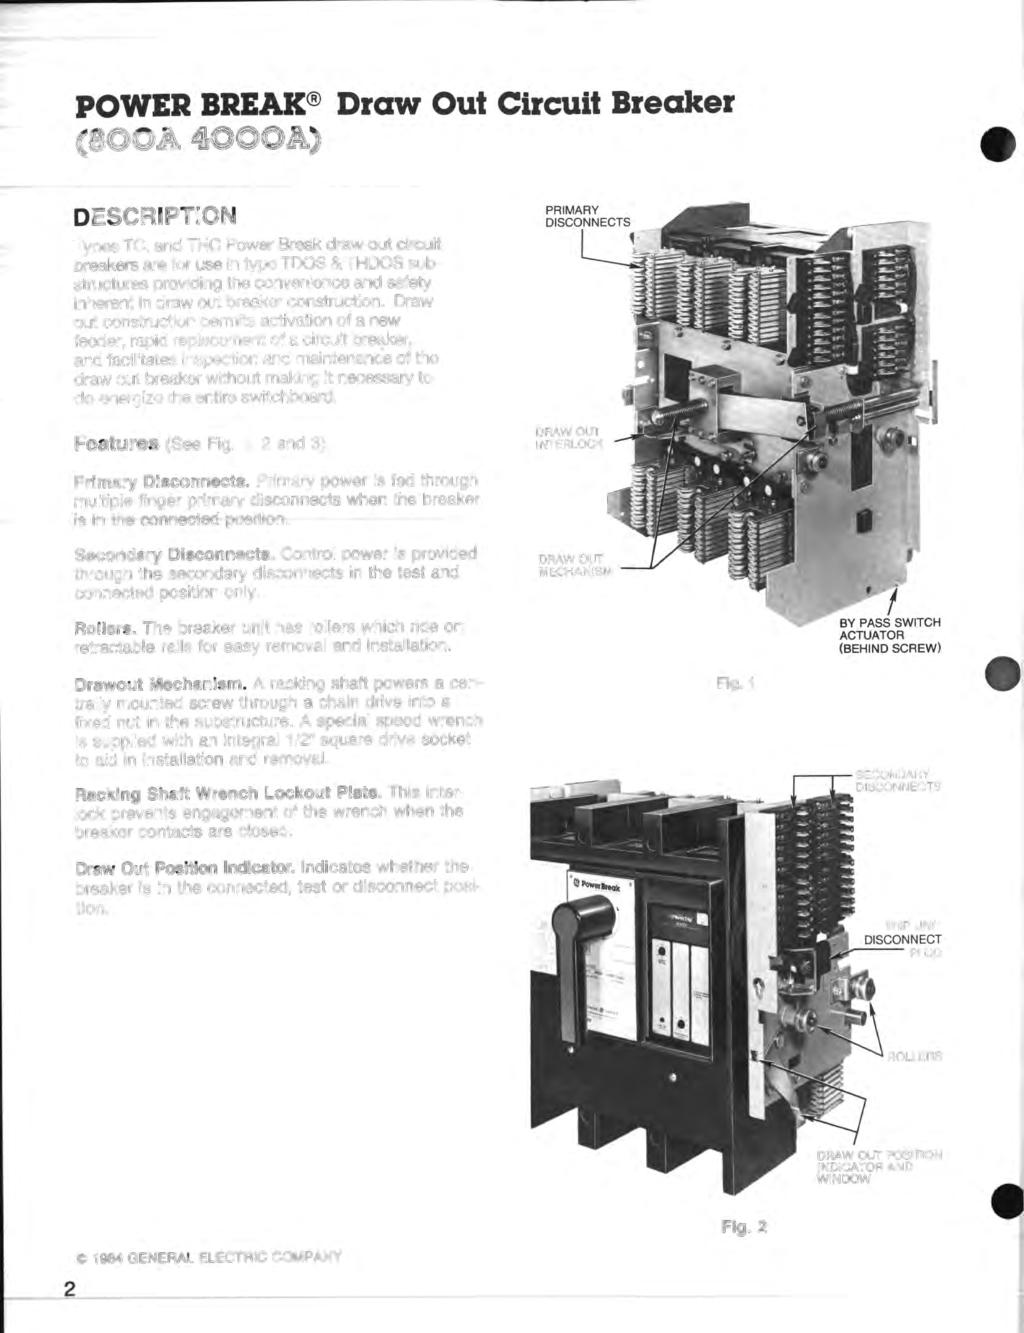 POWER BREAK Draw Out Circuit Breaker (SOOA 4000A) DESCRIPTION Types TC, and THC Power Break draw out circuit breakers are for use in type TDOS & THDOS substructures providing the convenience and